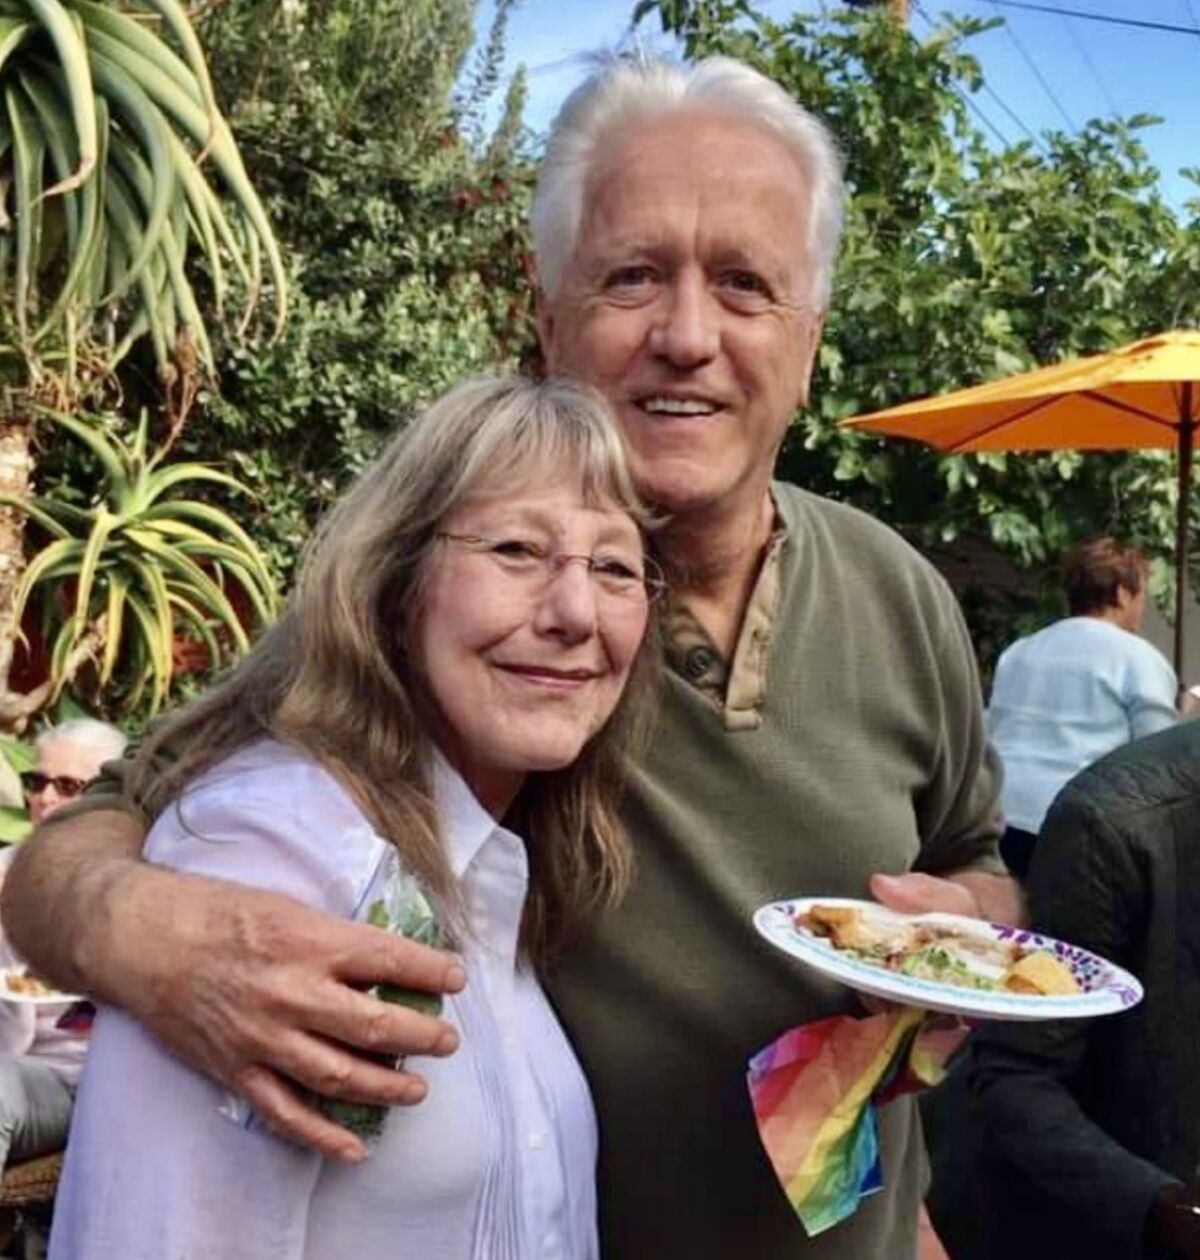 Gene Coster with past customer and friend, Liz Abbott, during a Quel Fromage reunion at Evelyn Goldman's house in May, 2019.